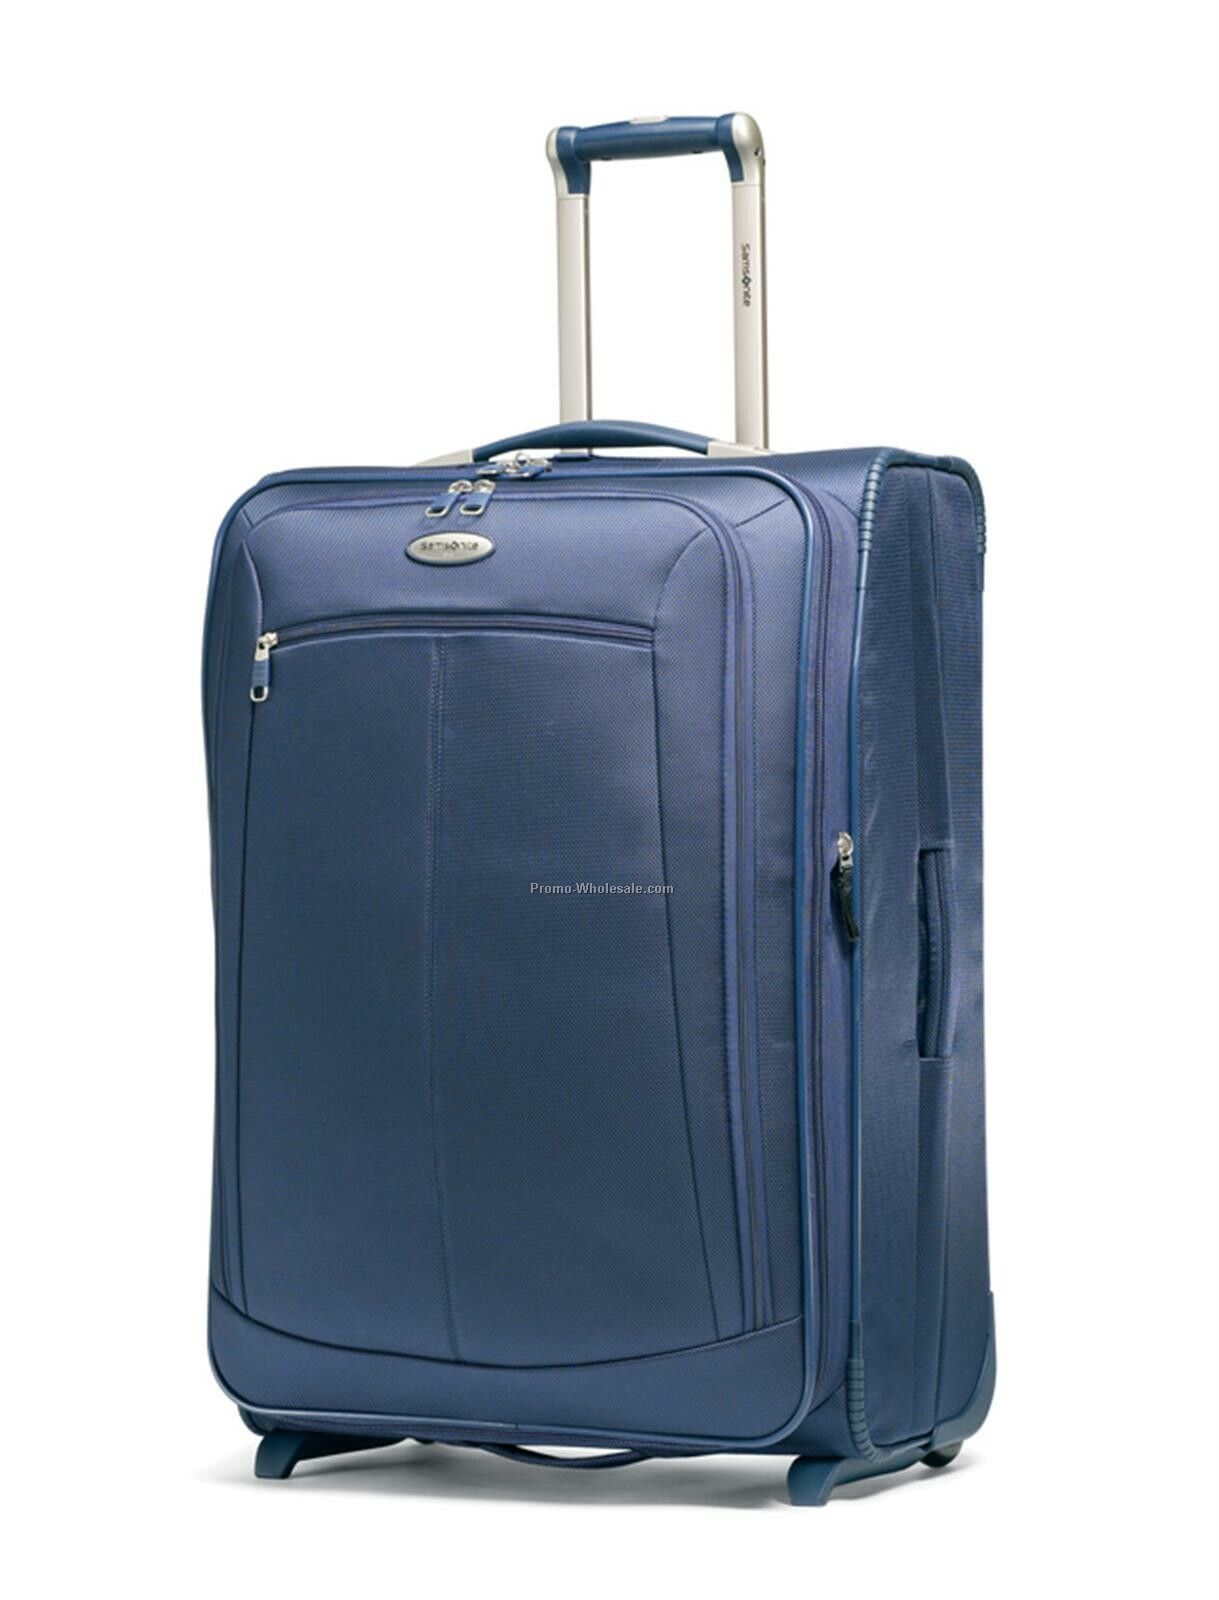 Silhouette 26" Upright Luggage